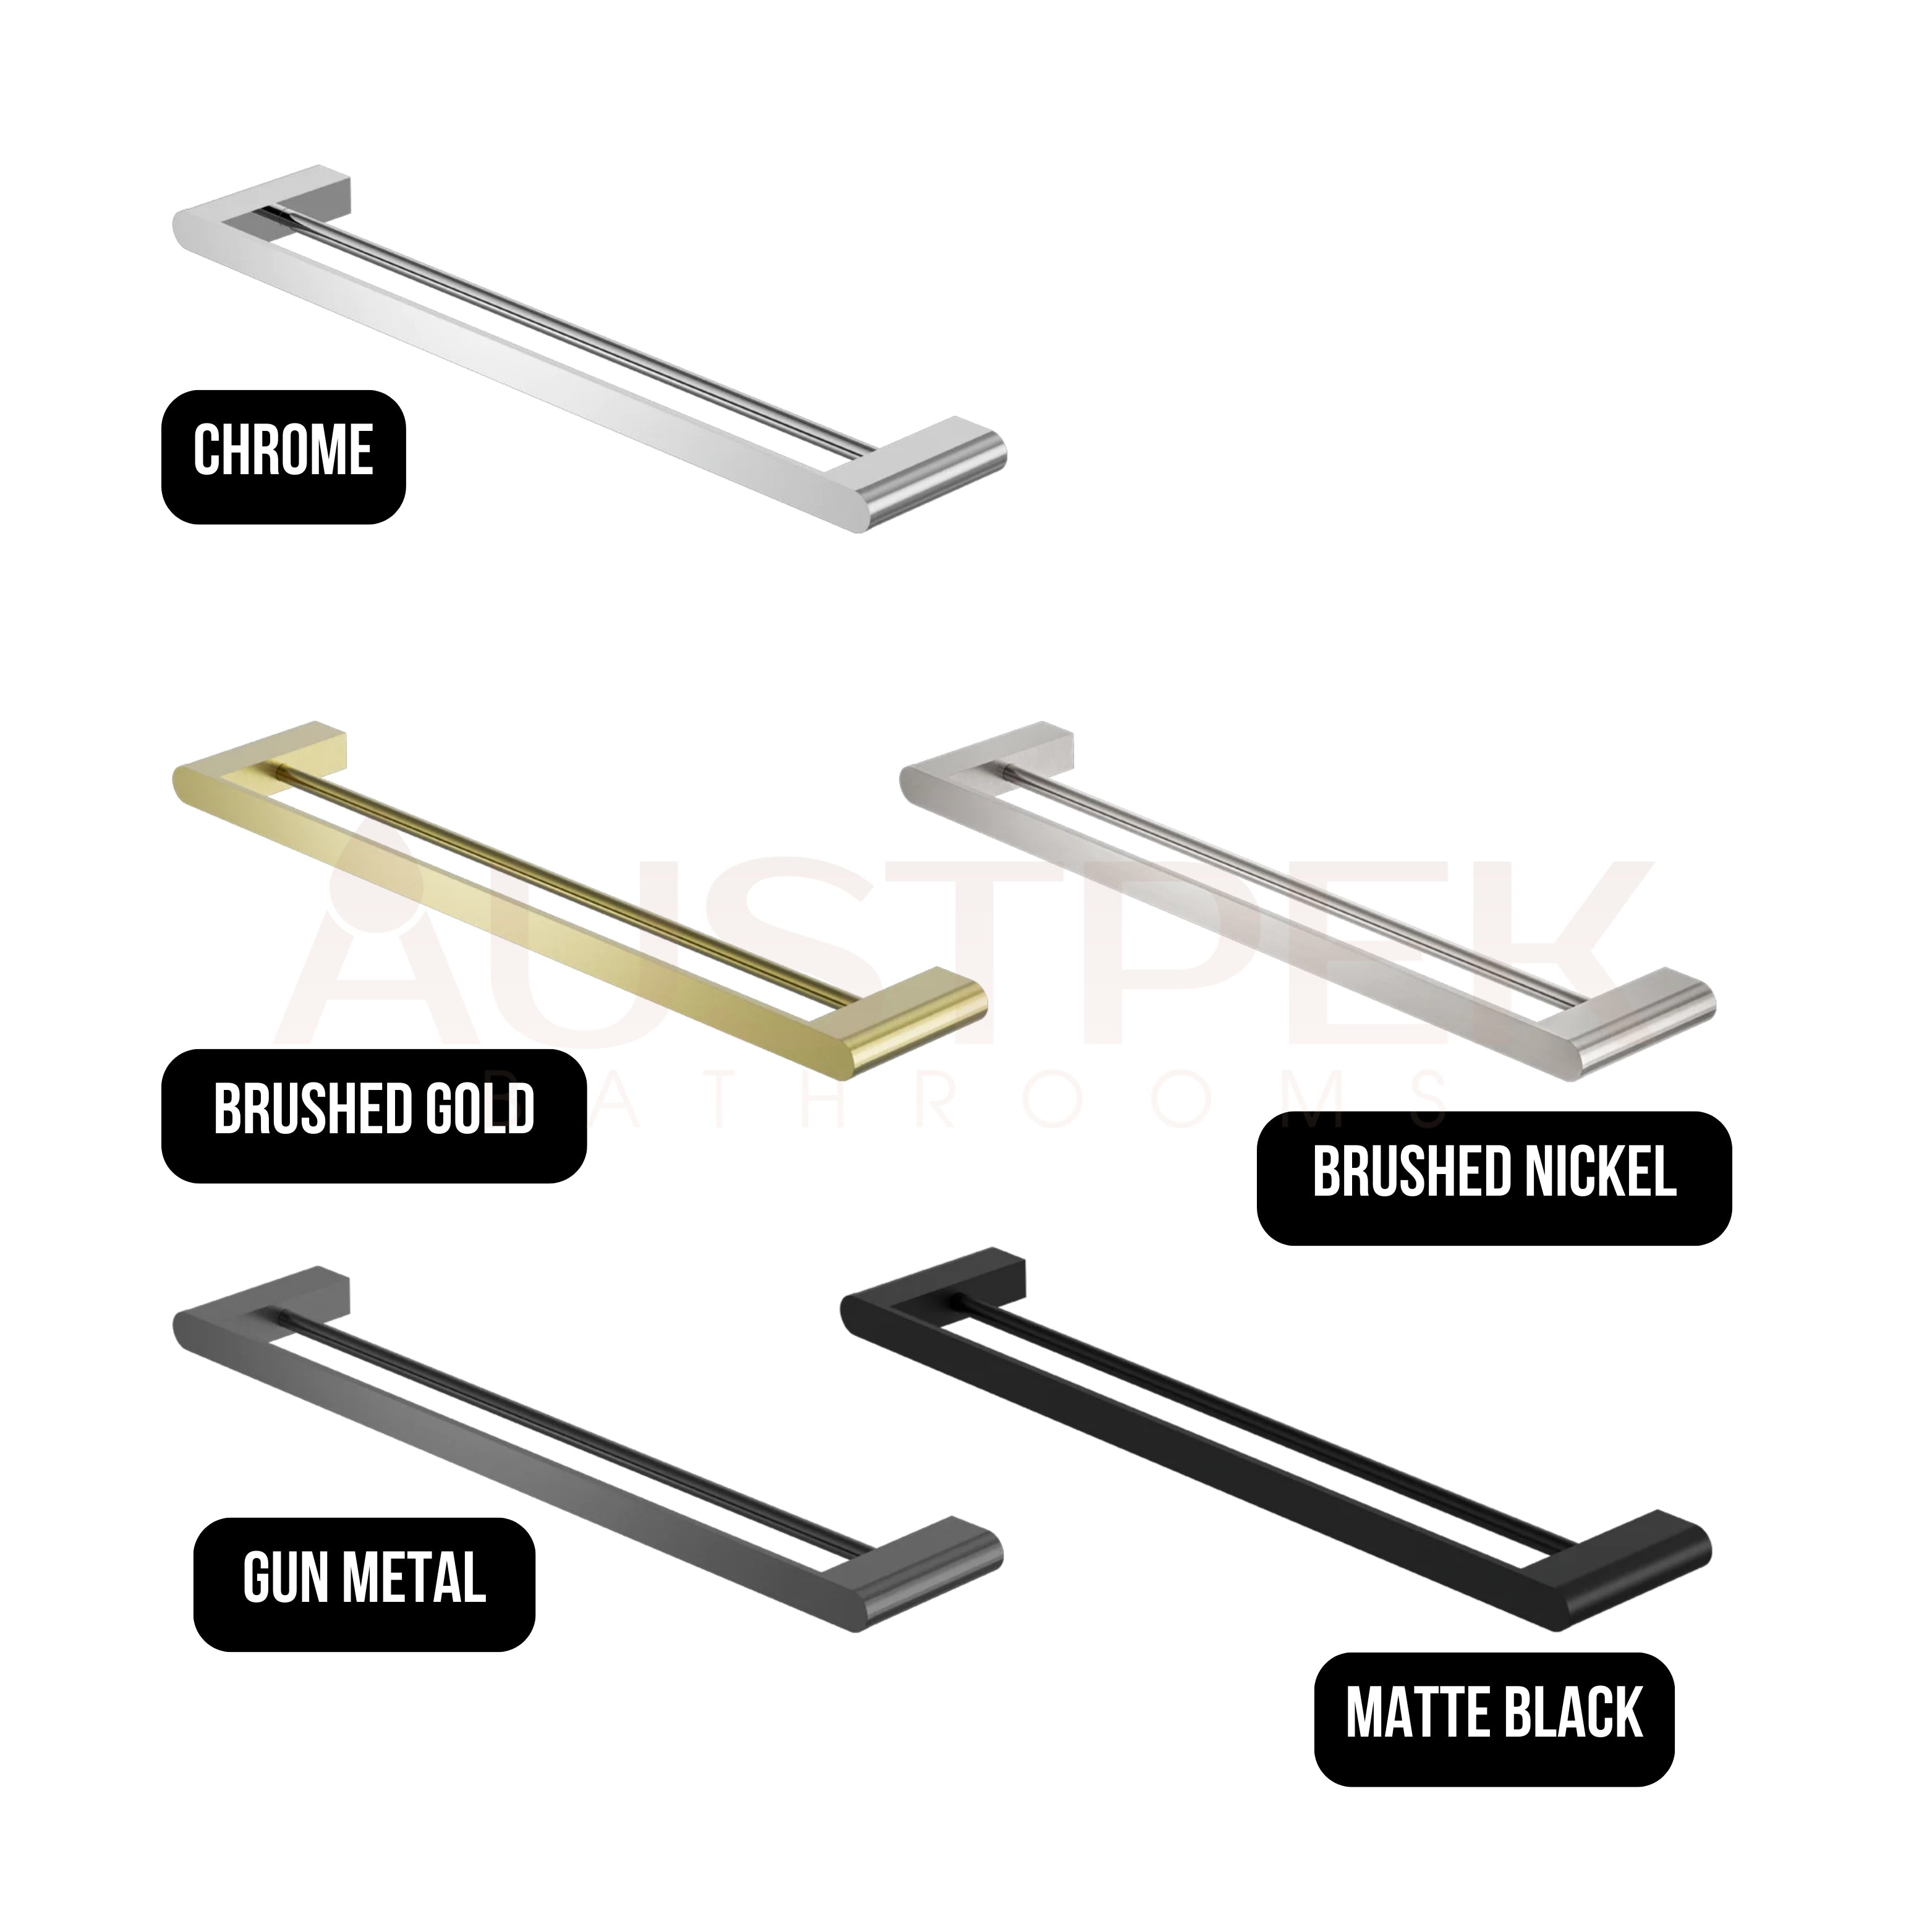 NERO BIANCA NON-HEATED DOUBLE TOWEL RAIL BRUSHED GOLD (AVAILABLE IN 600MM AND 800MM)